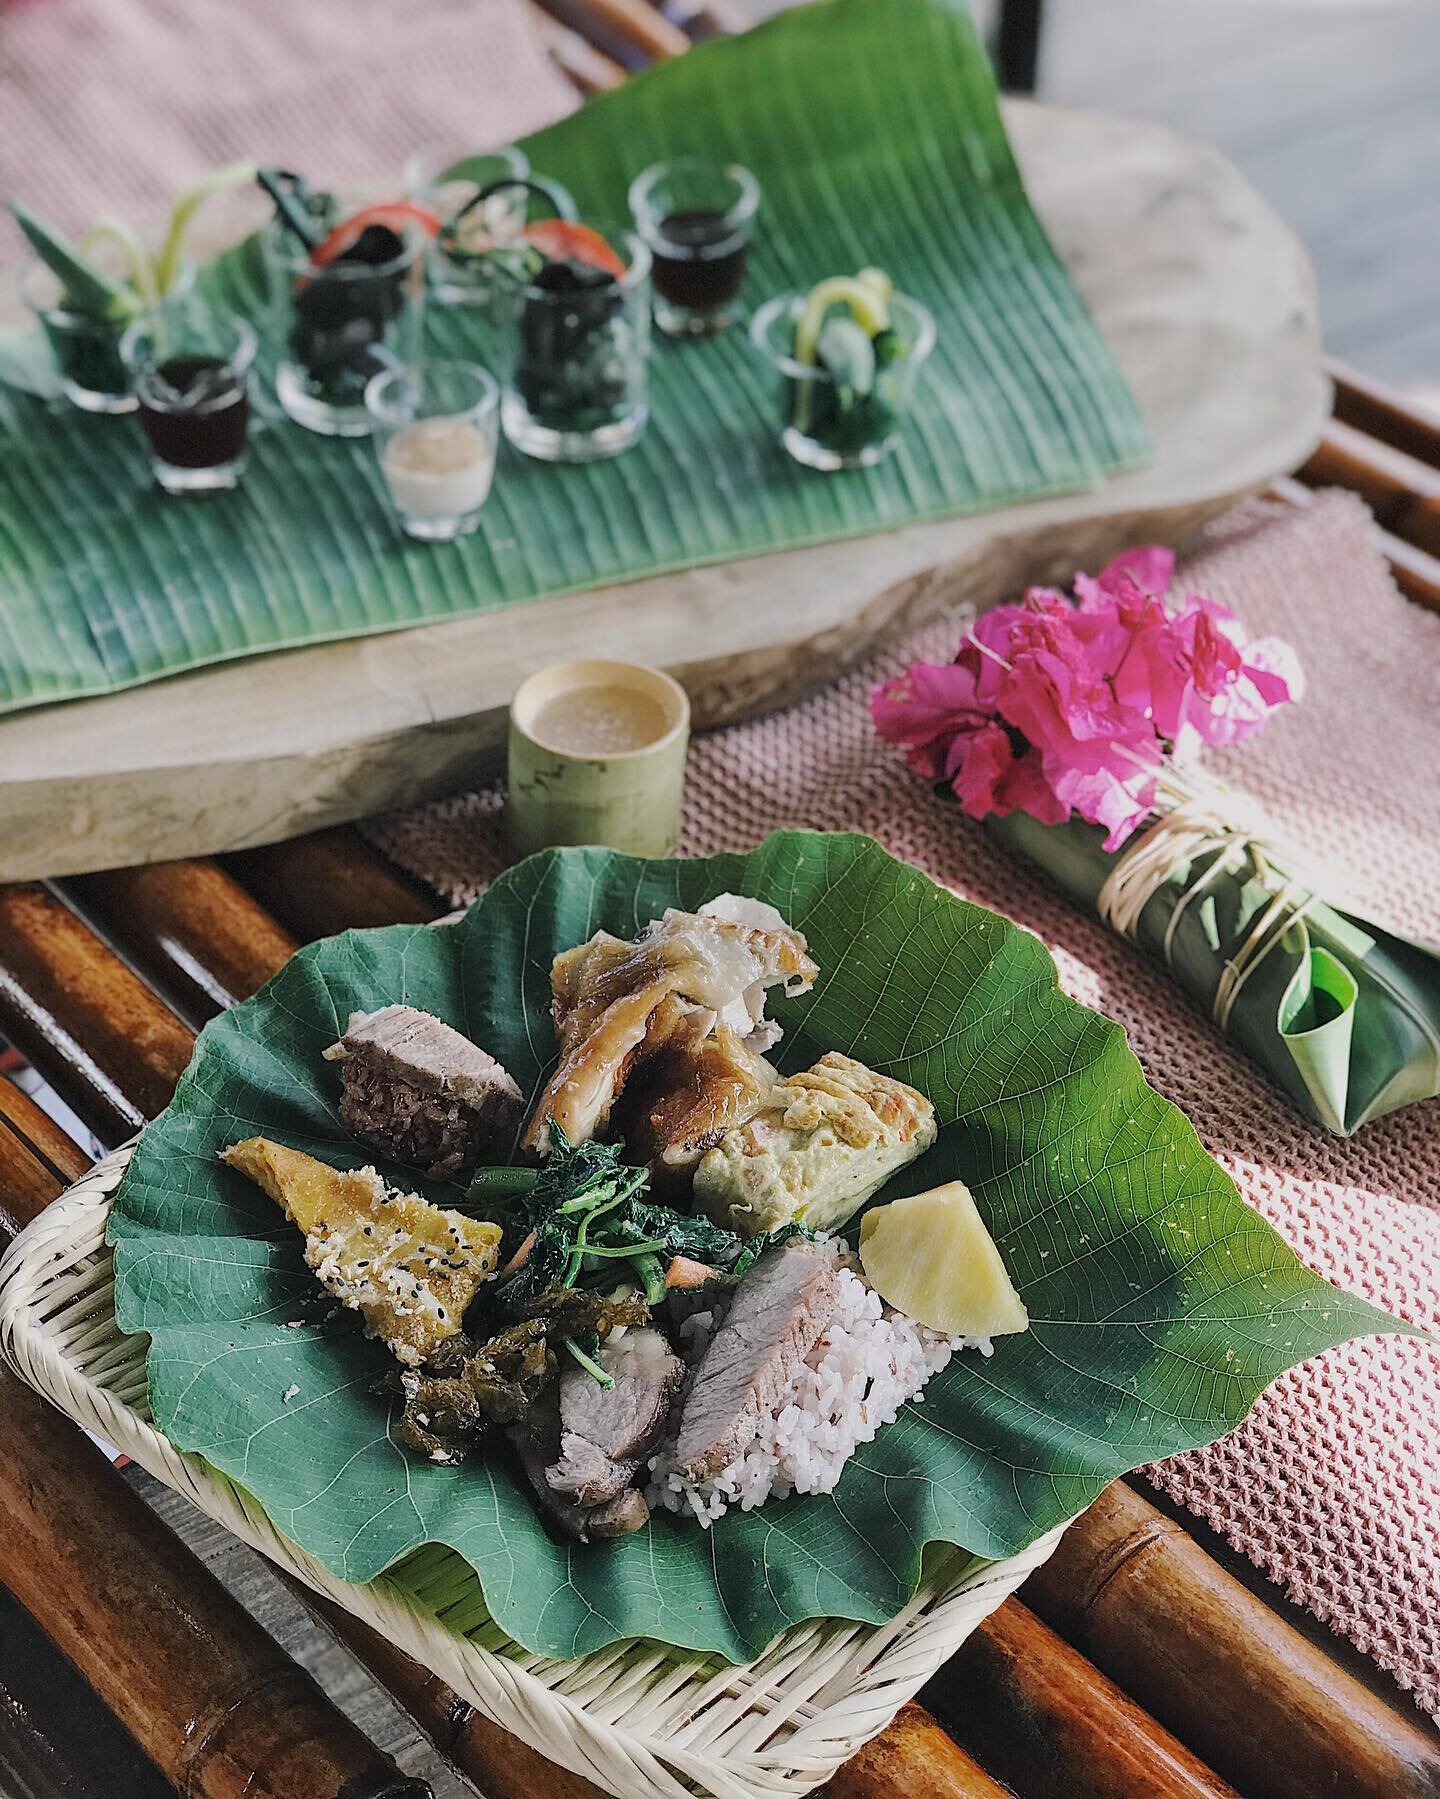 (2/2) A really memorable indigenous cuisine dinner and performance by the Amis Tafalong community in Hualien. They prepared an incredible feast for us with really special items like herbal algae omelettes, vinasse smoked chicken, algae salad, wild gr